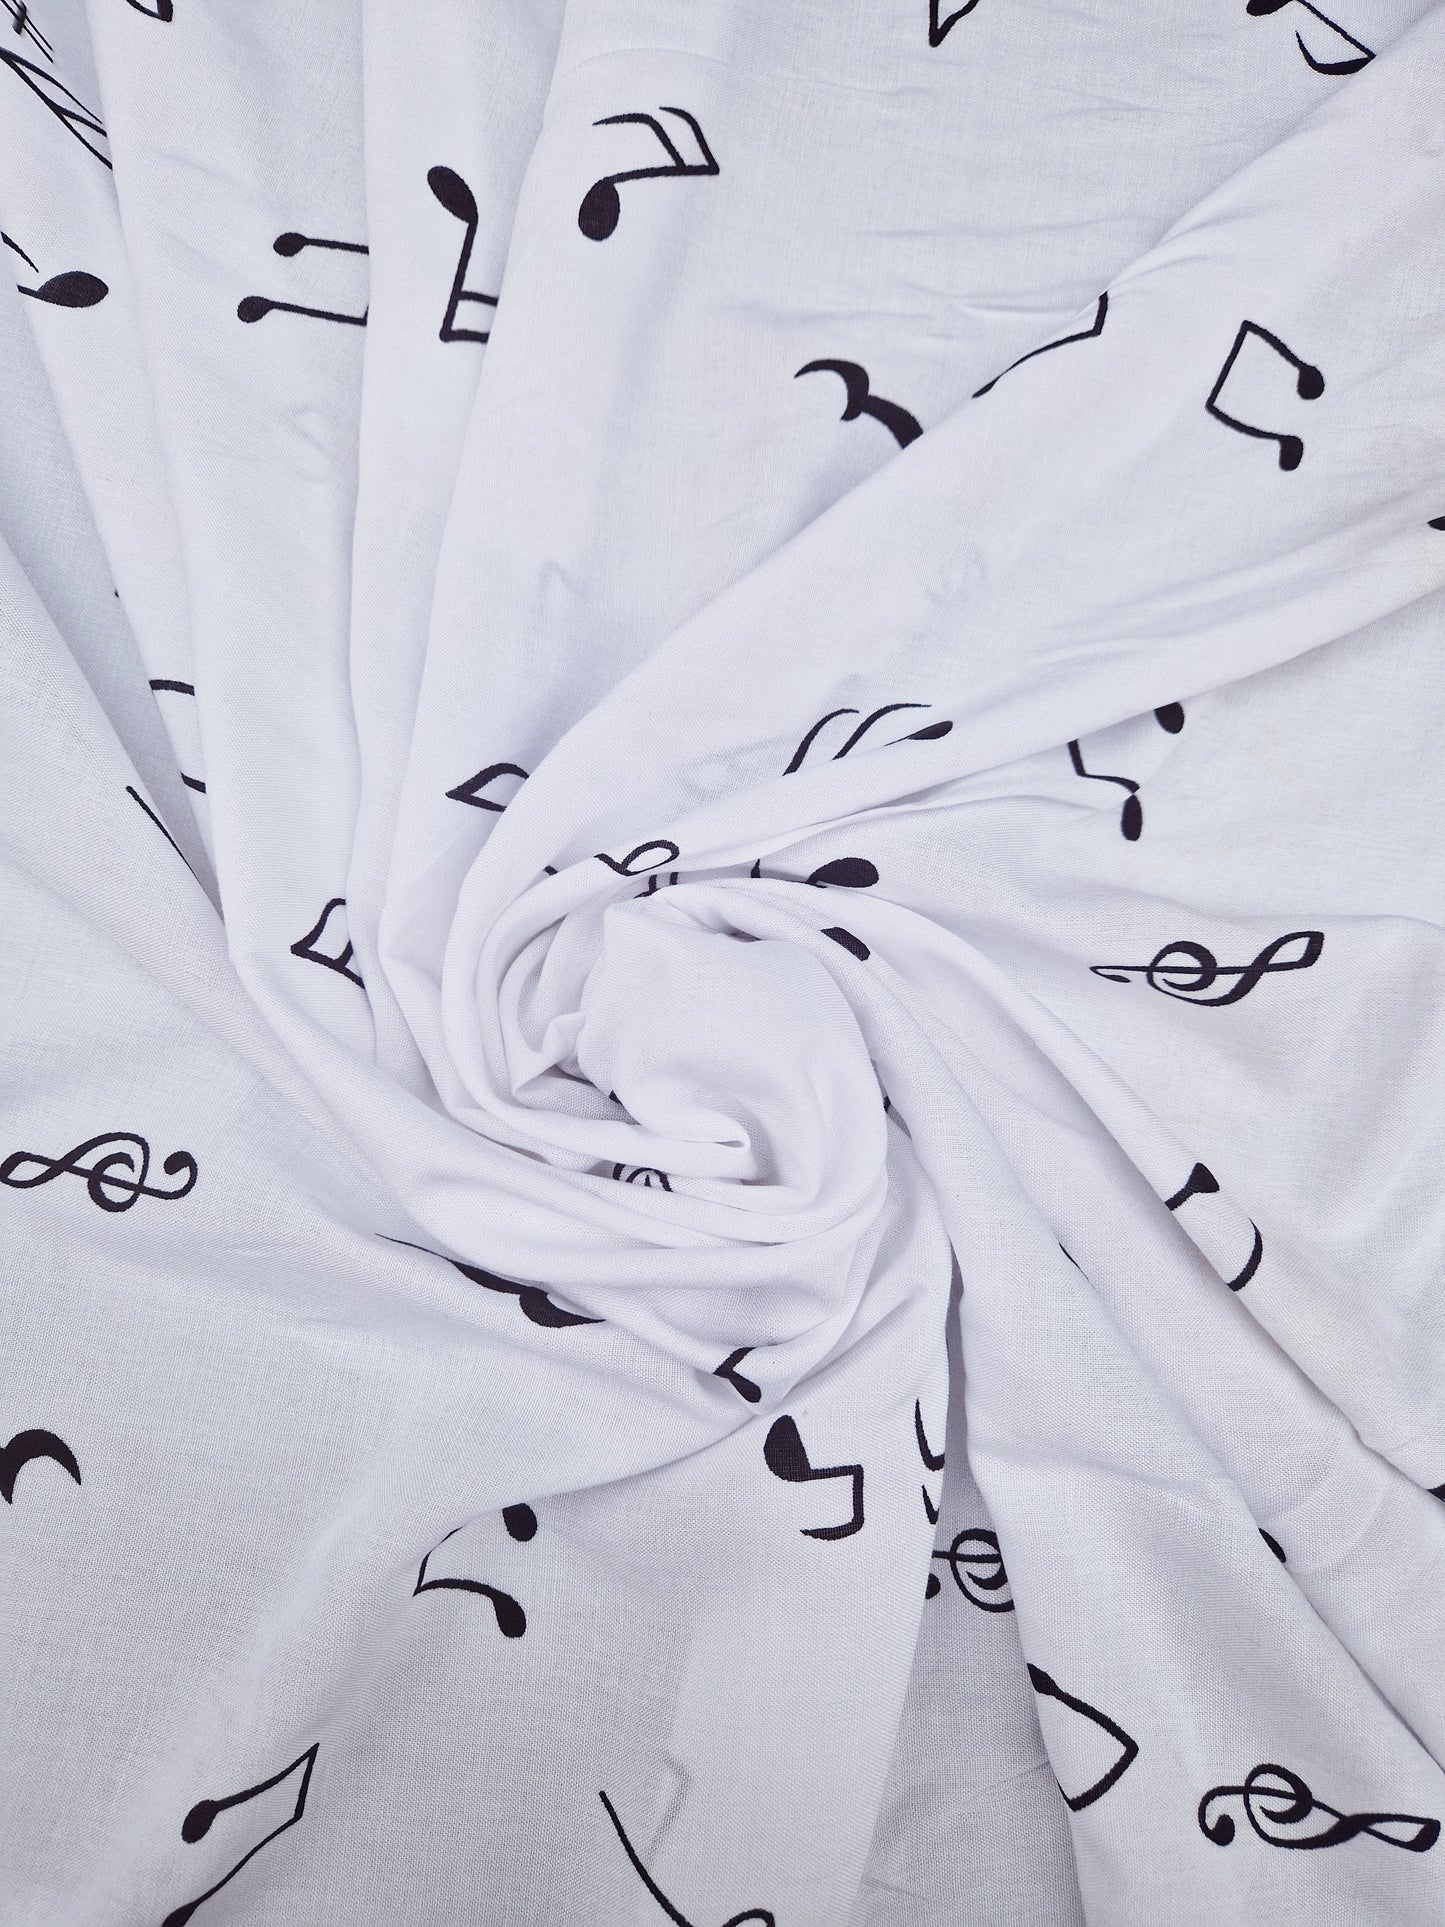 Viscose - black and white music print 58" wide - sold by the metre